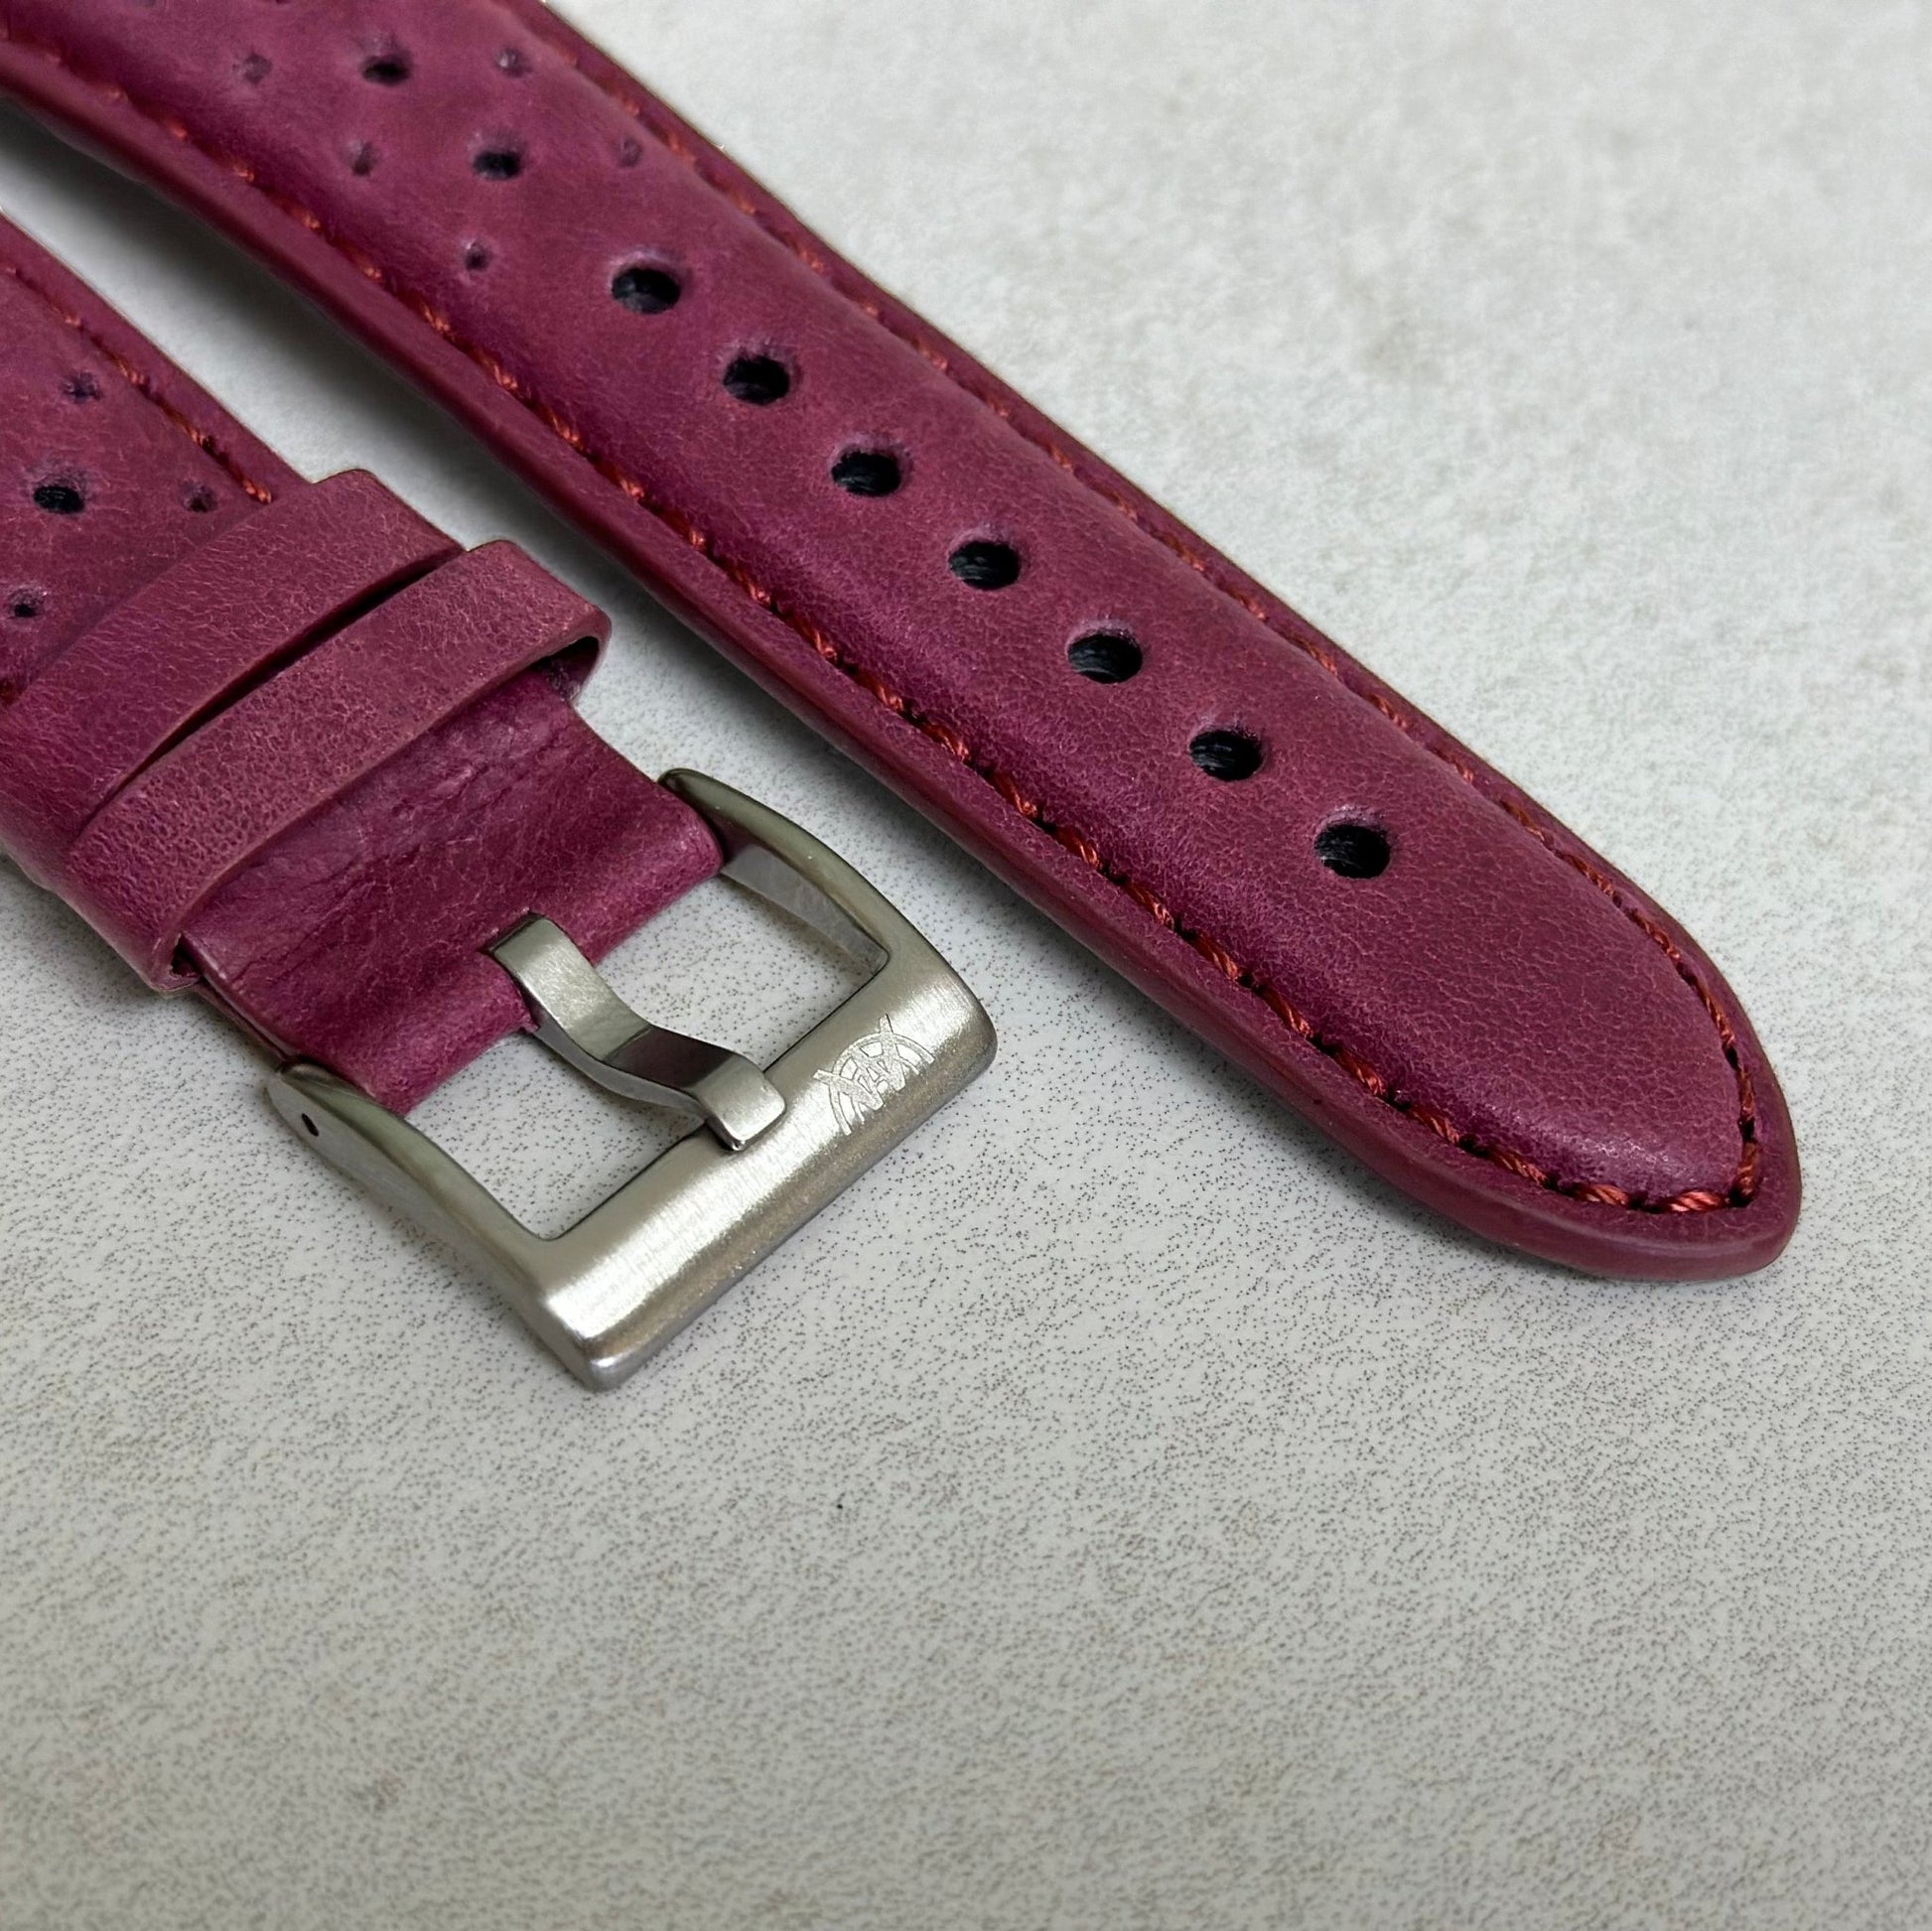 Brushed 316L stainless steel buckle on the Montecarlo plum purple full grain leather watch strap. Watch And Strap